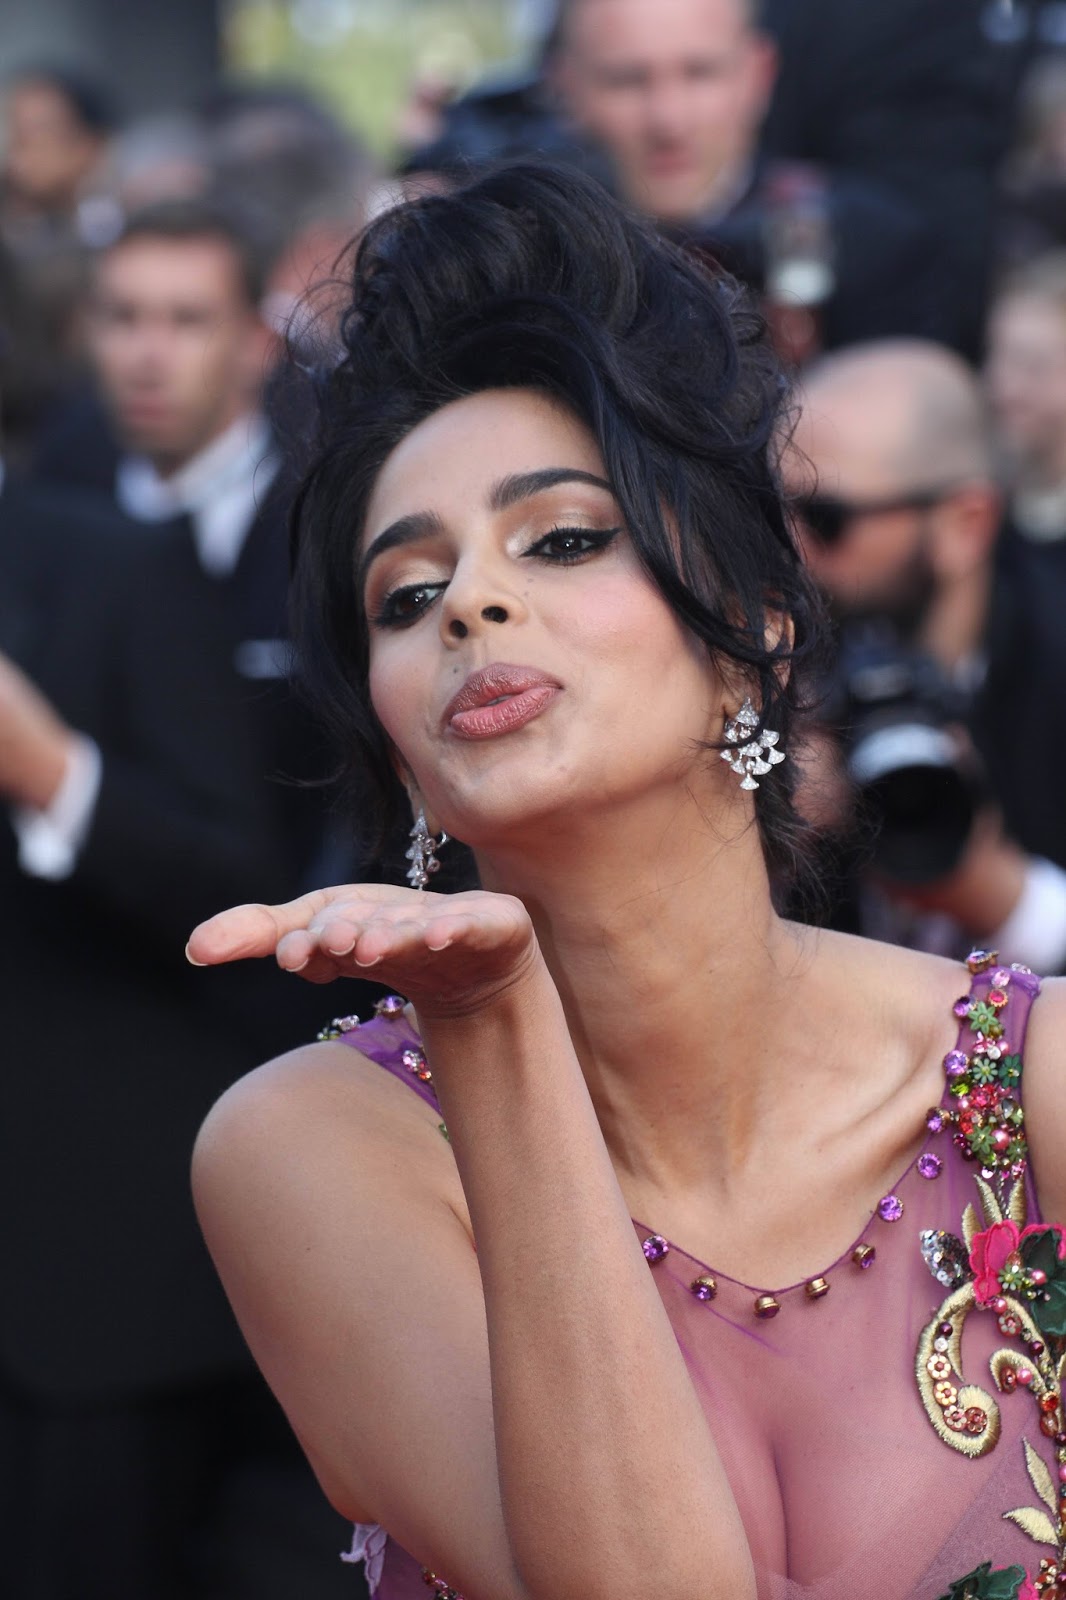 Mallika Sherawat Looks Hot At 'The Beguiled' Premiere During The 70th Cannes Film Festival 2017